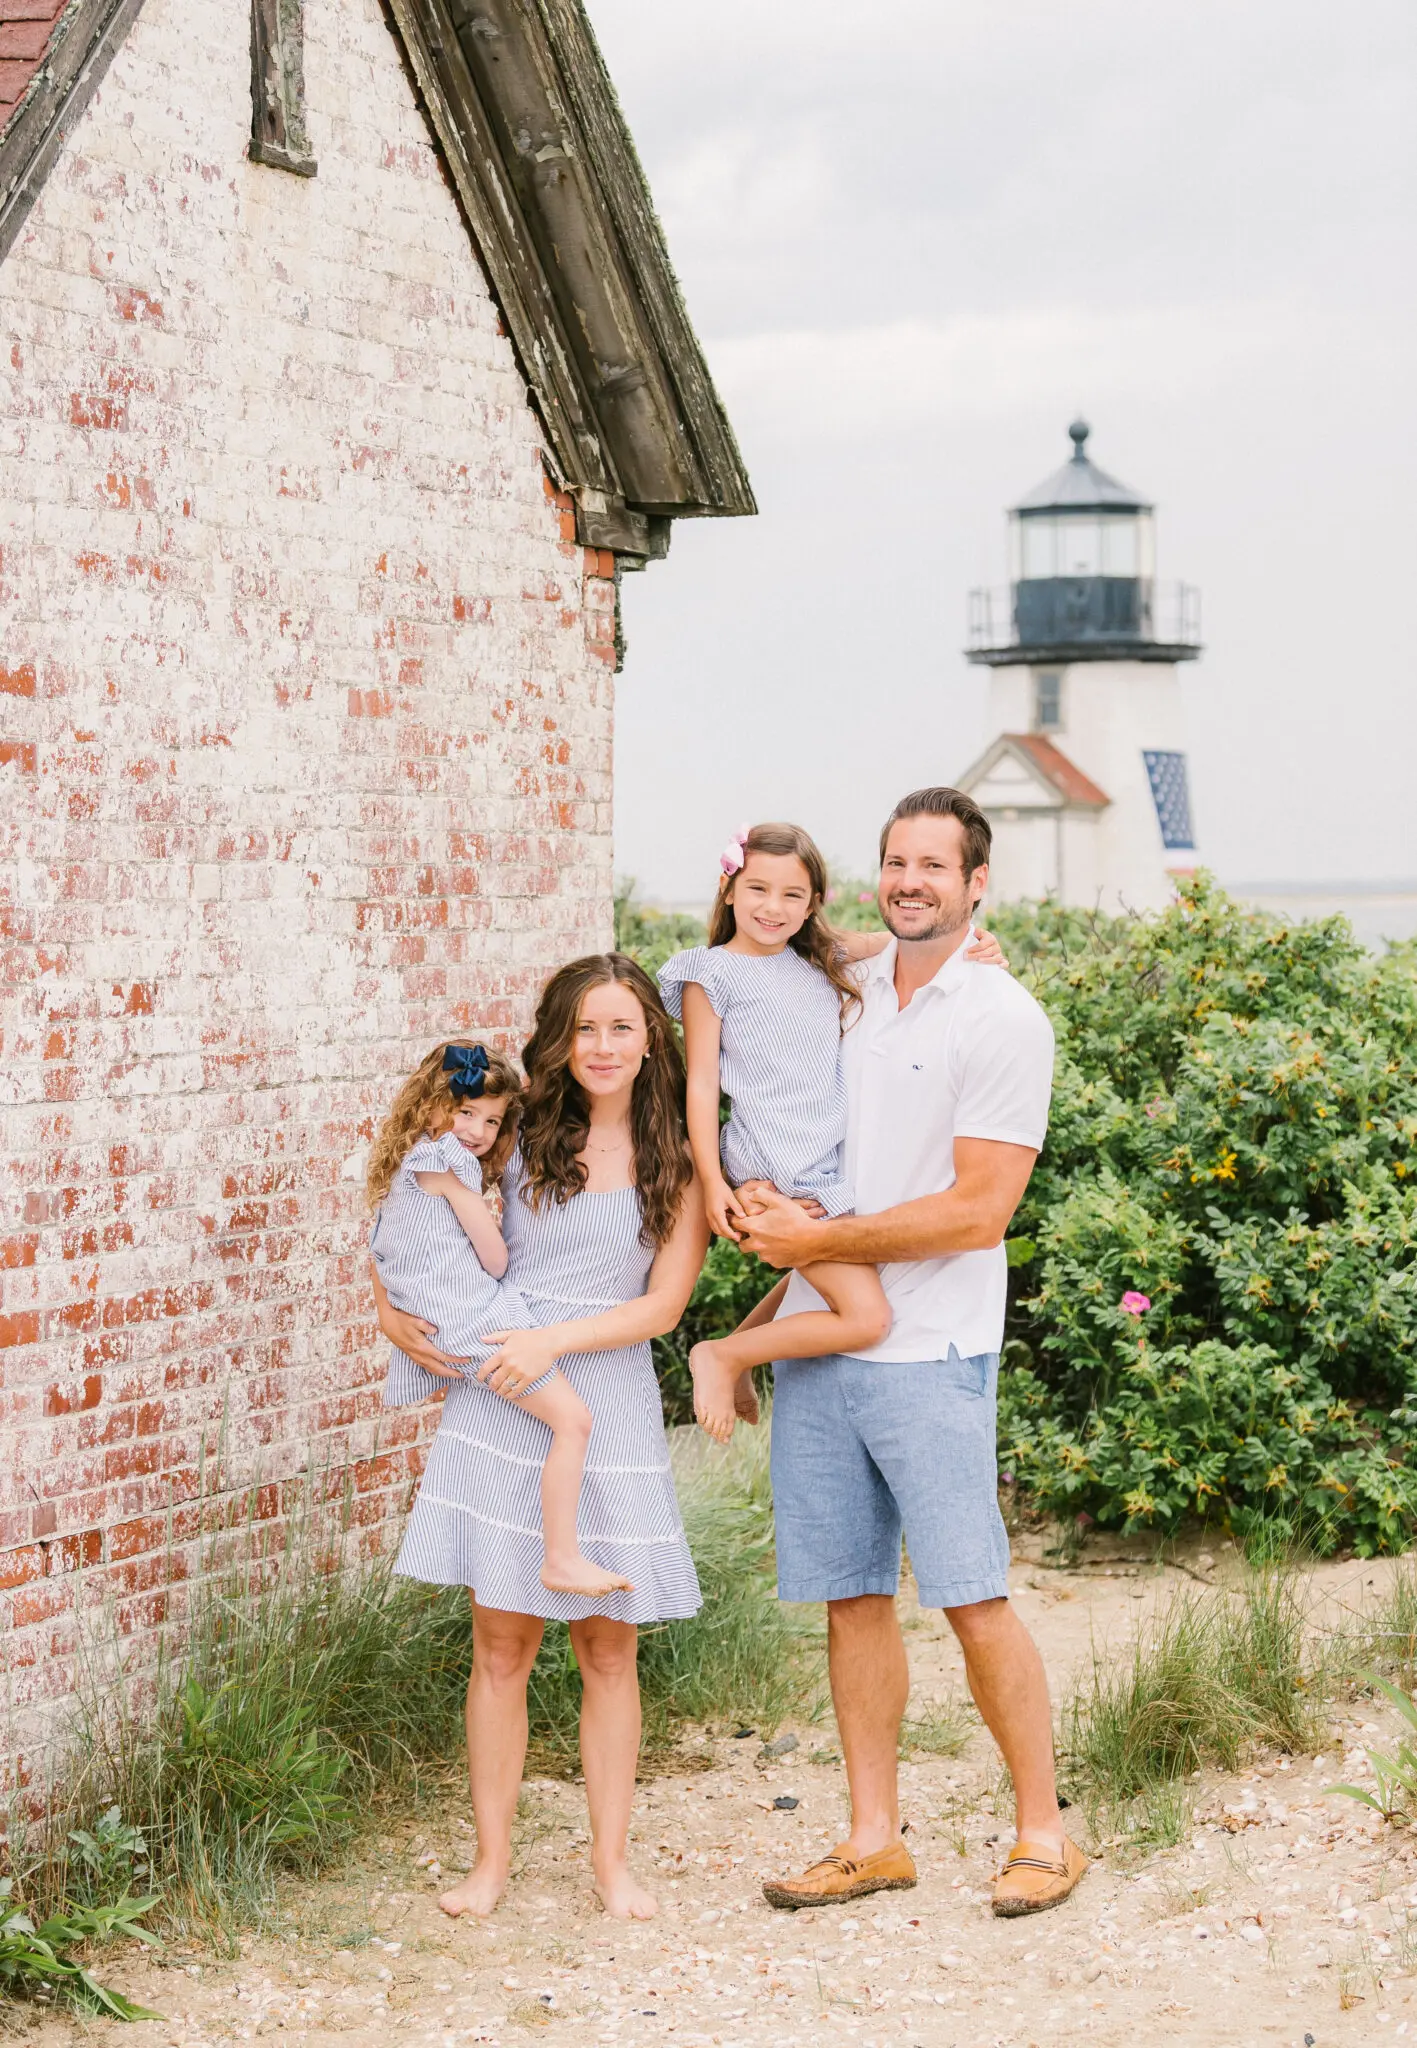 What to Wear for Family Photos in the Spring or Summer